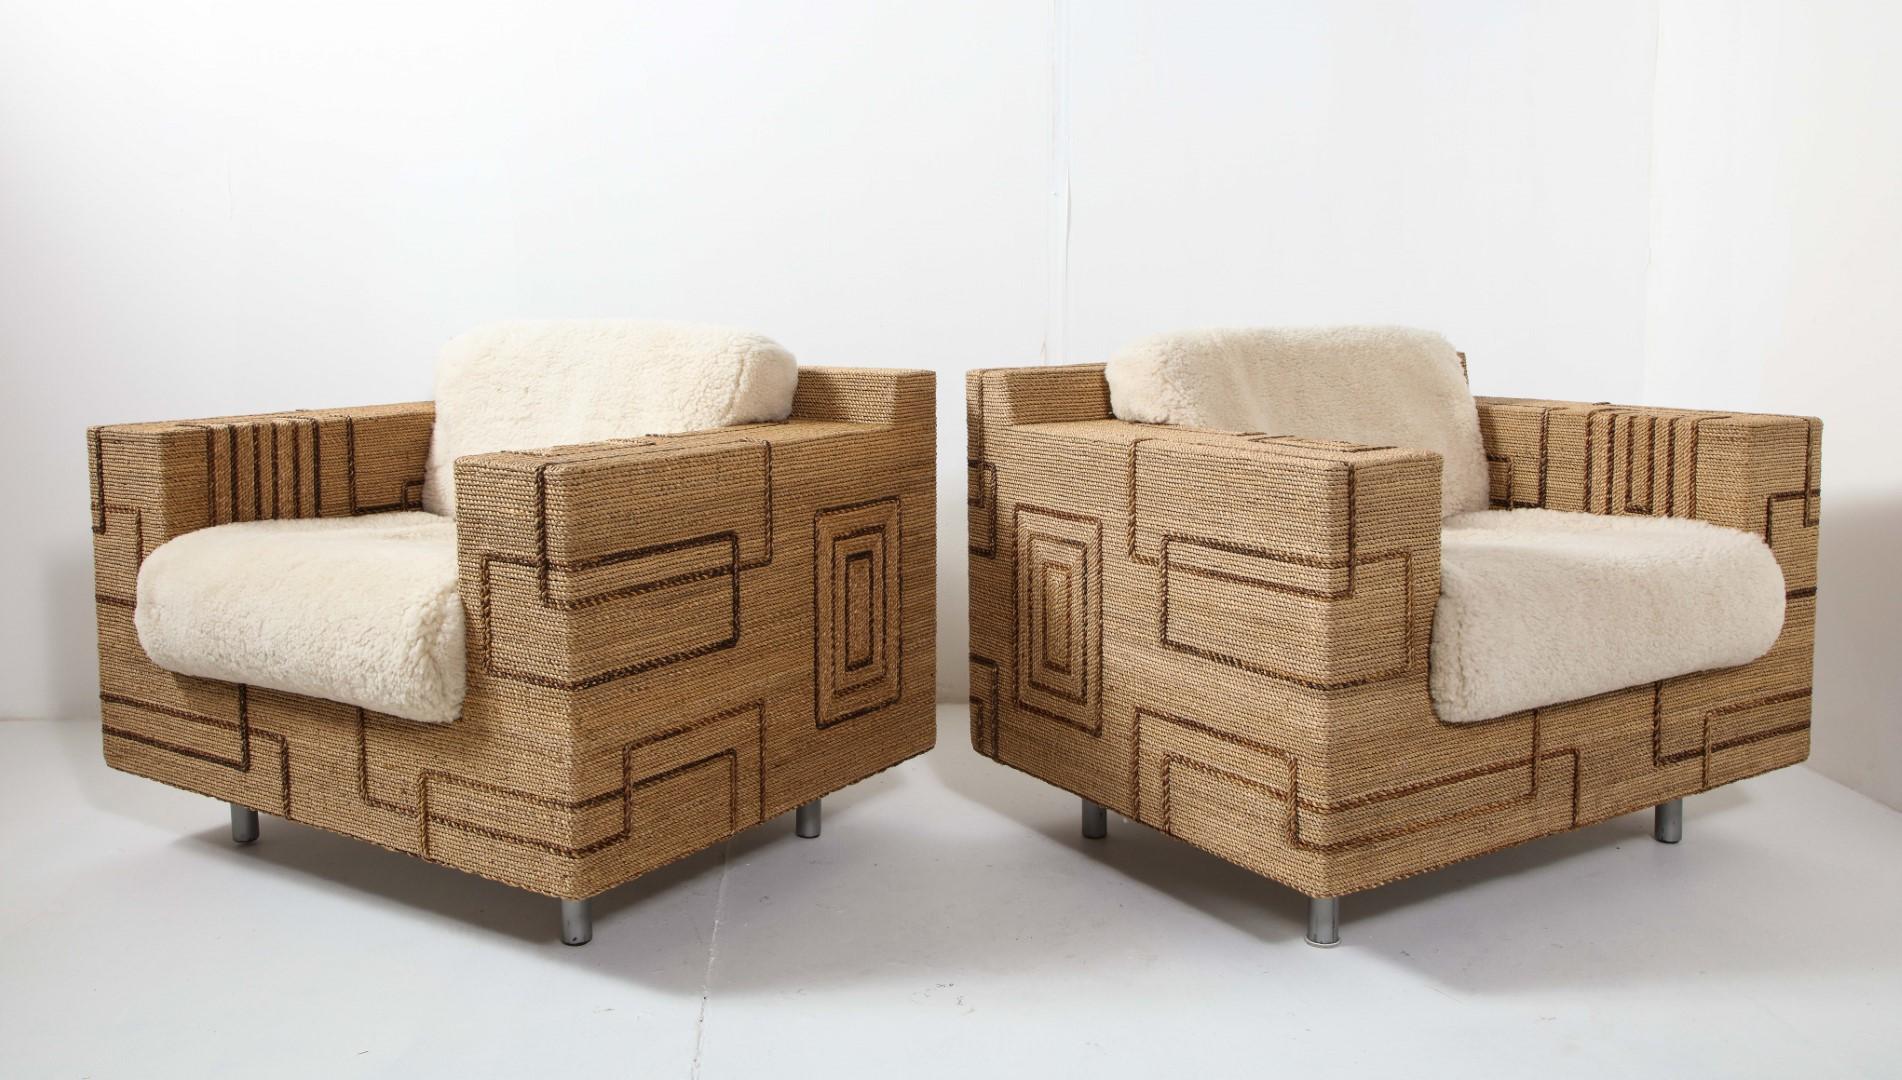 A pair of 1970s Italian rope-inlaid lounge chairs, with geometric line patterns in a contrasting color. Cylindrical metal legs. Newly made shearling cushions, separate back & seat cushions. 

Measures: Arm height: 24